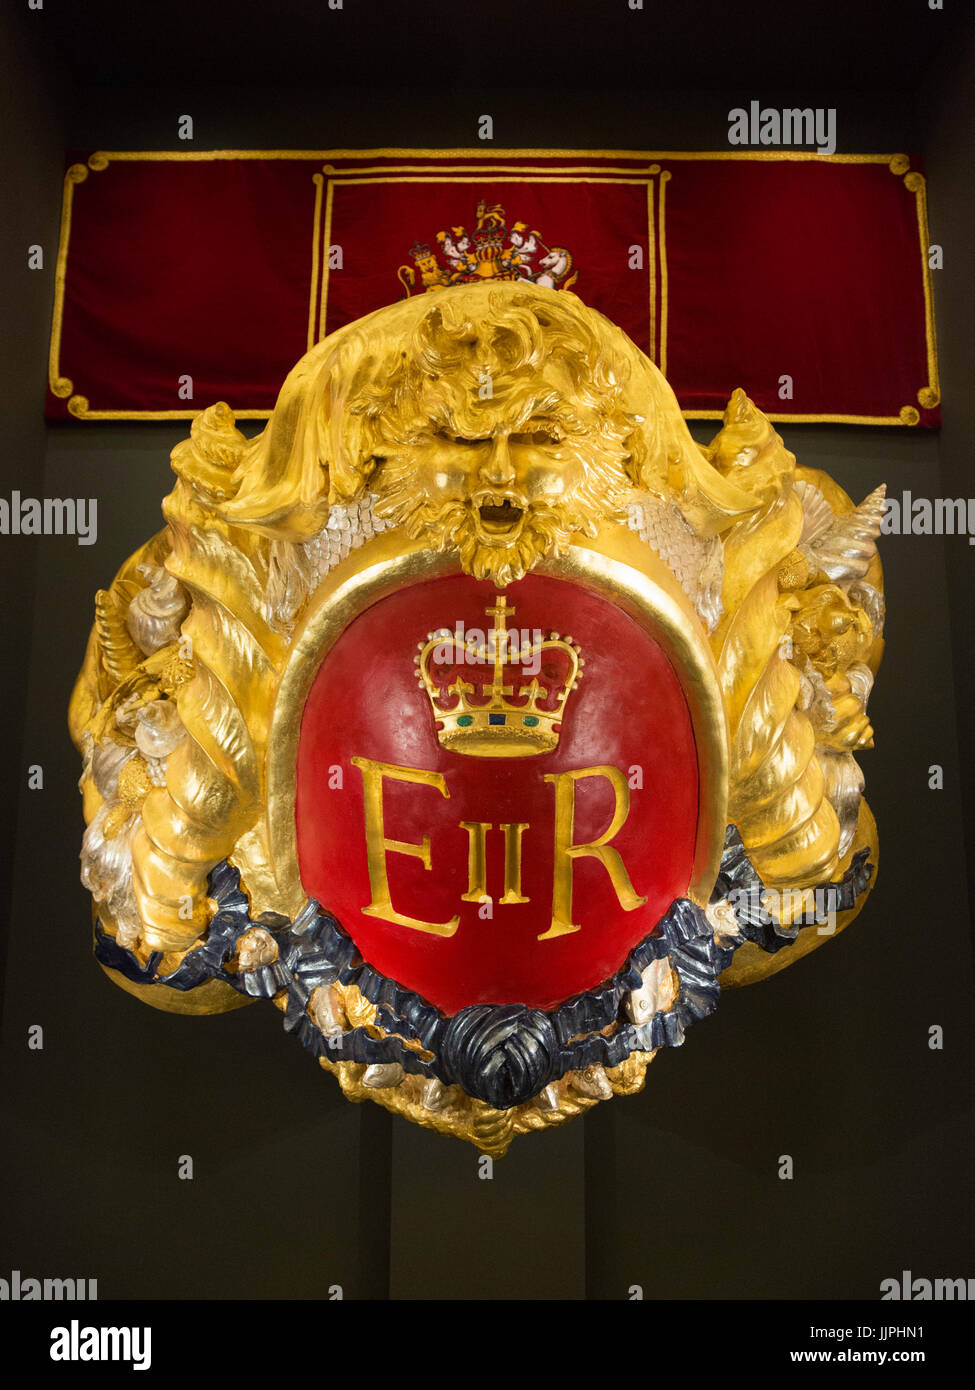 *** EMBARGOED to 00:01 BST, FRIDAY, 21 JULY 2017 *** Pictured: Velvet hanging of the United Kingdom's coat of arms taken from MV Spirit of Chartwell, when used as the Royal Barge. From the Thames Diamond Jubilee Pageant, 2012. This summer, visitors to the State Rooms at Buckingham Palace wiill enjoy a special display of more than 200 gifts presented to Her Majesty The Queen throughout her 65-year reign and a special tribute to Diana, Princess of Wales. The State Rooms are open to the public from 22 July to 1 October 2017. Stock Photo